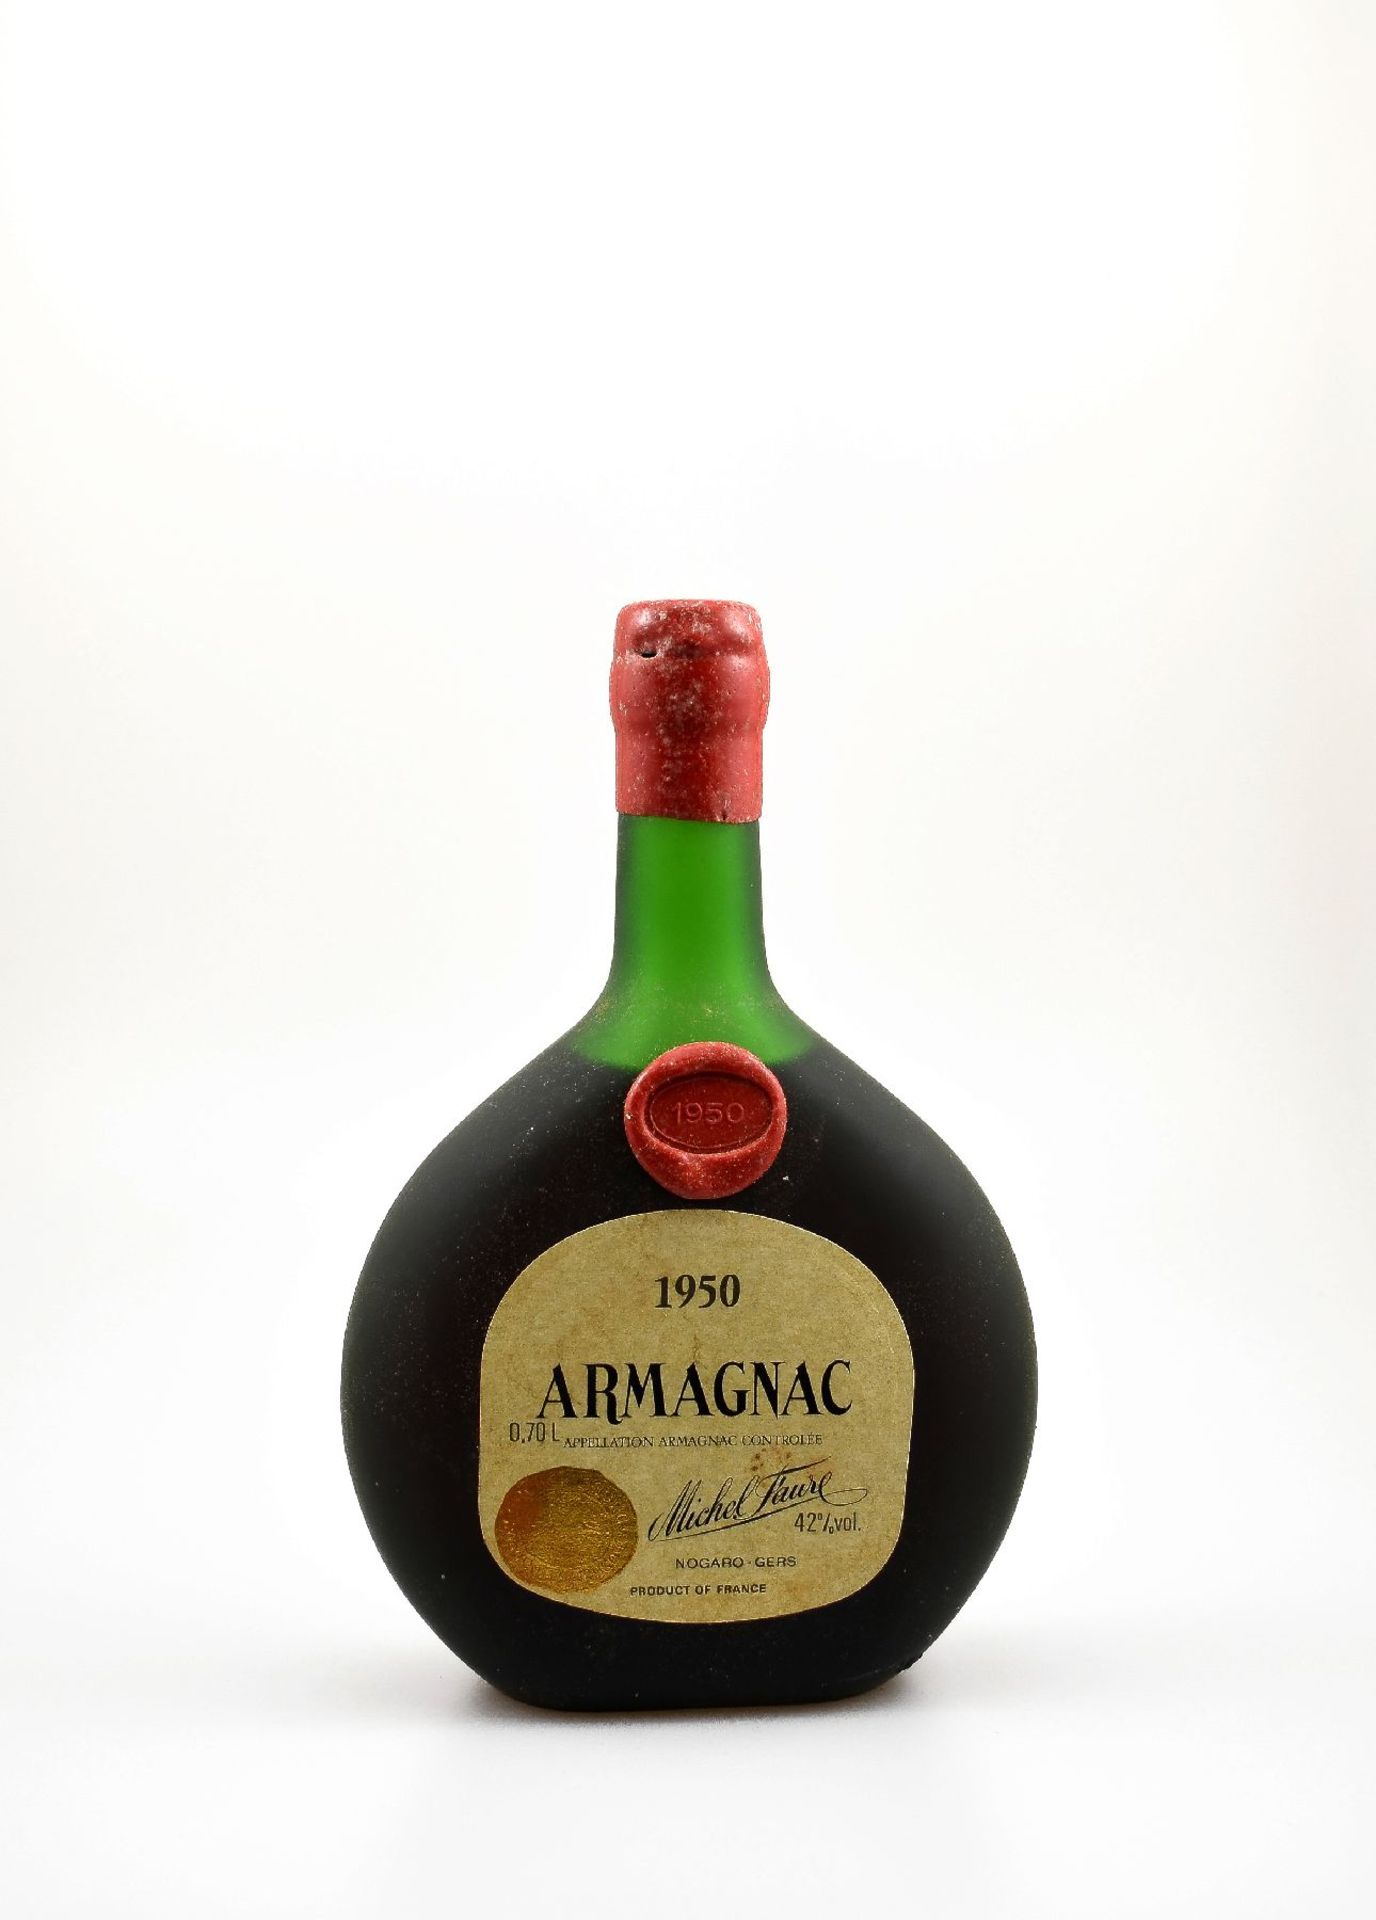 1 bottle 1950 Armagnac, approx 70 cl, 42 % Vol., distance between capsule and Armagnac: approx 5 cm,